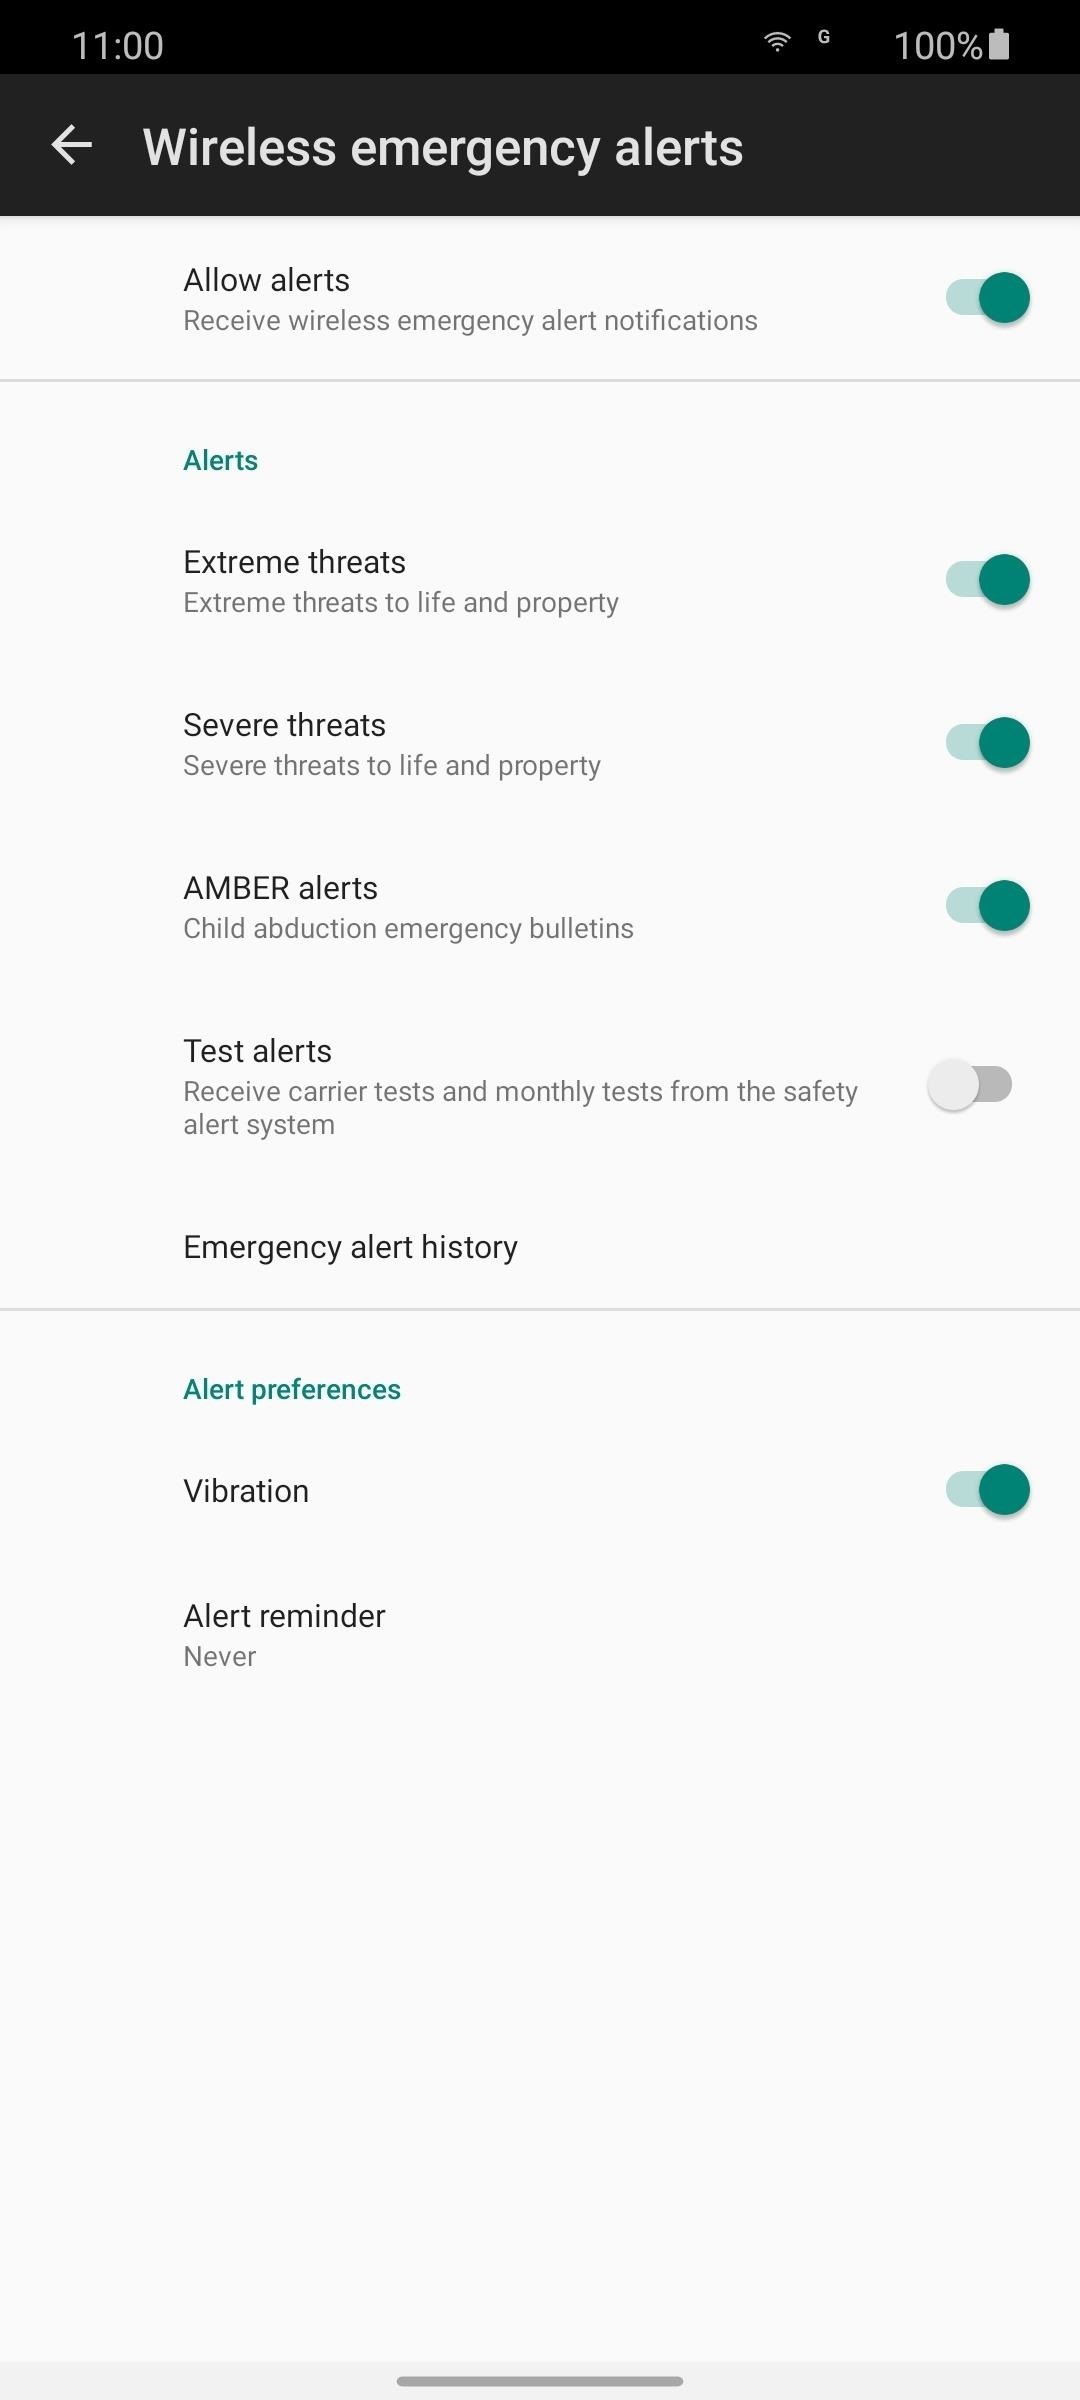 All the New Features in Samsung's One UI 3.0 Update for Galaxy Devices